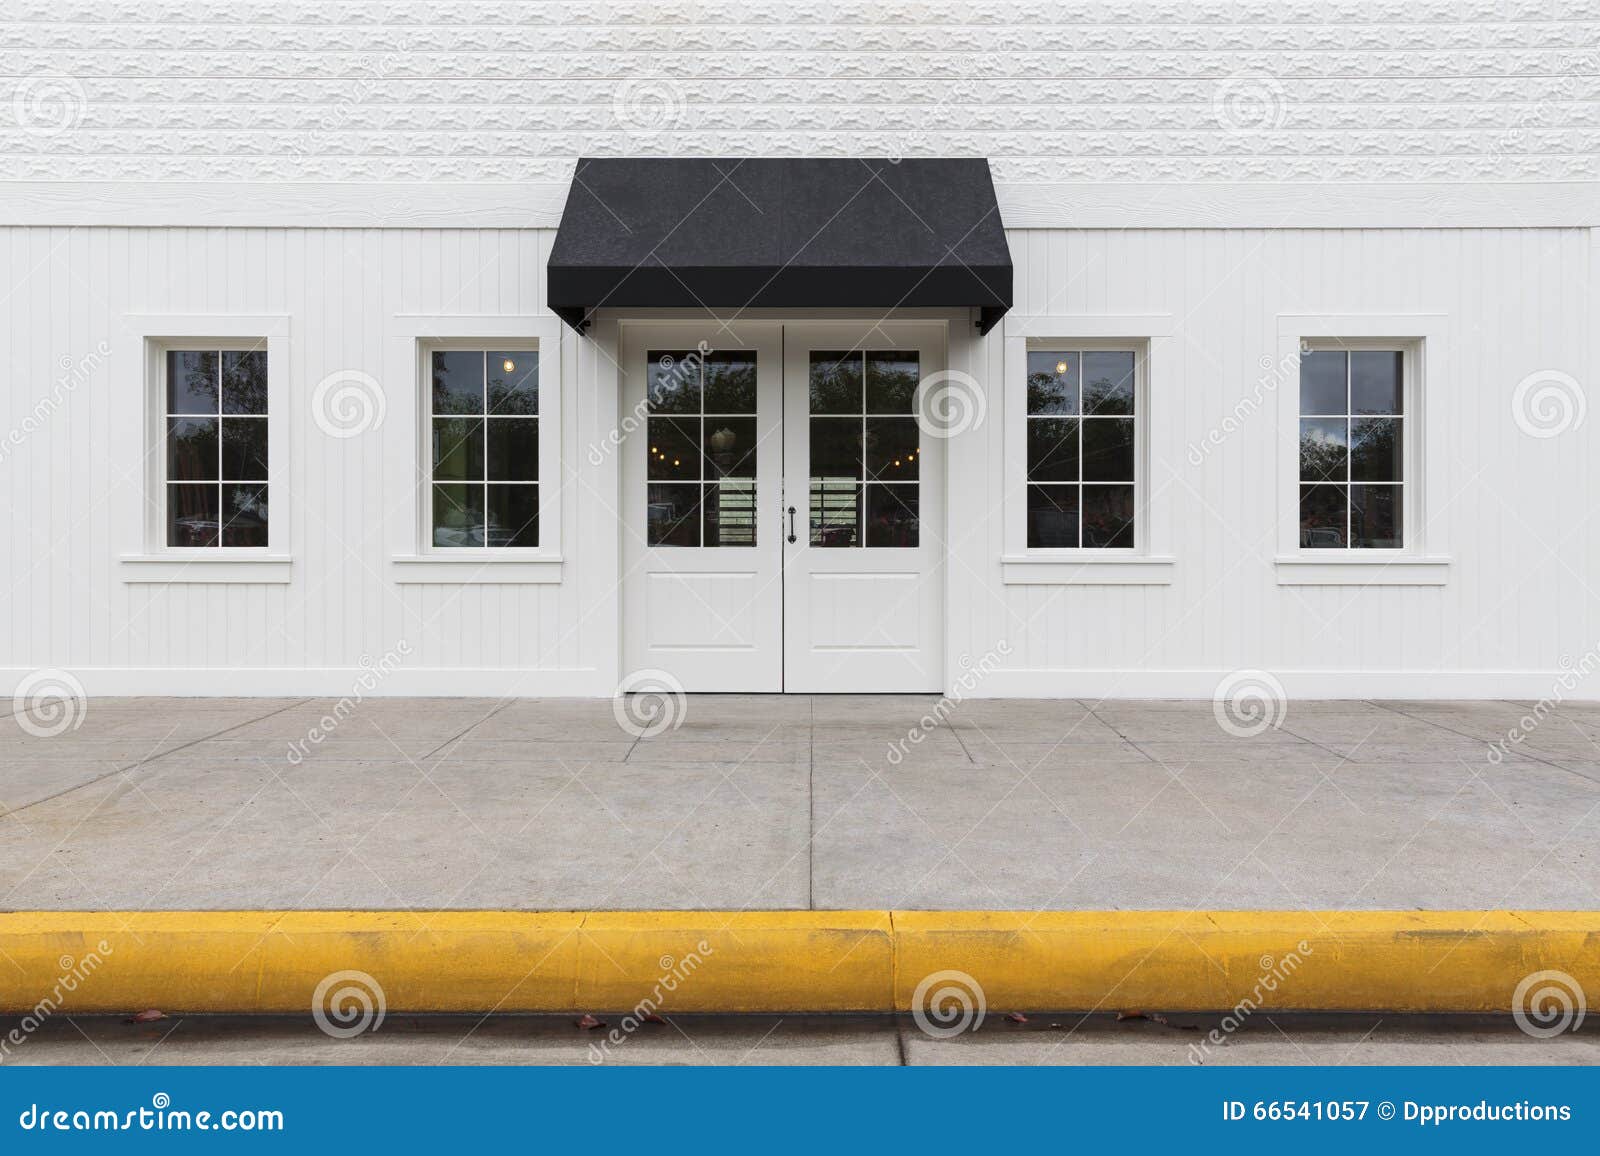 storefront building with black awning